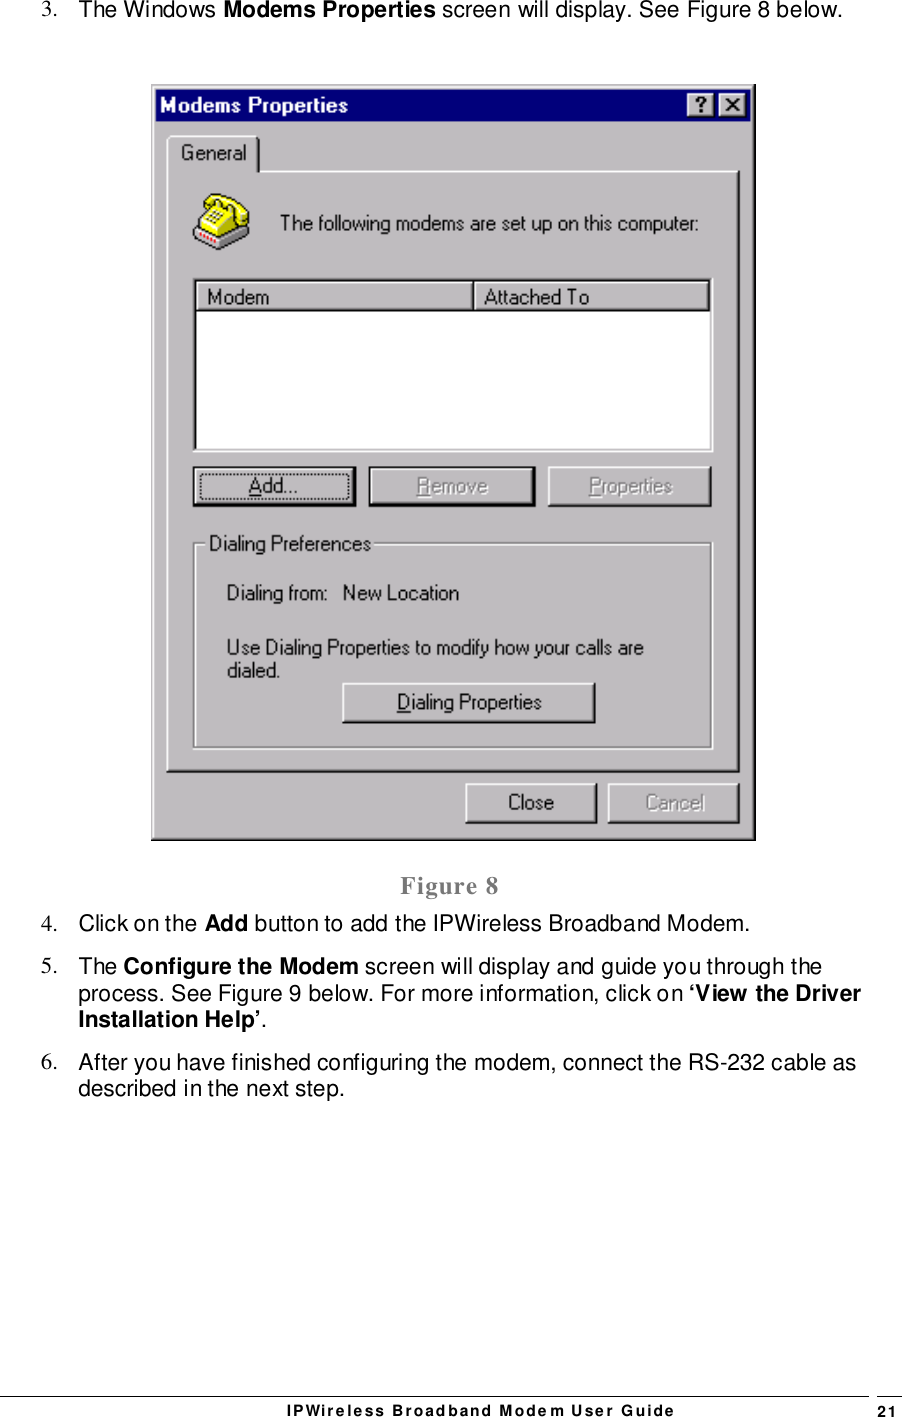 IPWireless Broadband Modem User Guide 213. The Windows Modems Properties screen will display. See Figure 8 below.Figure 84.  Click on the Add button to add the IPWireless Broadband Modem.5. The Configure the Modem screen will display and guide you through theprocess. See Figure 9 below. For more information, click on ‘View the DriverInstallation Help’.6.  After you have finished configuring the modem, connect the RS-232 cable asdescribed in the next step.